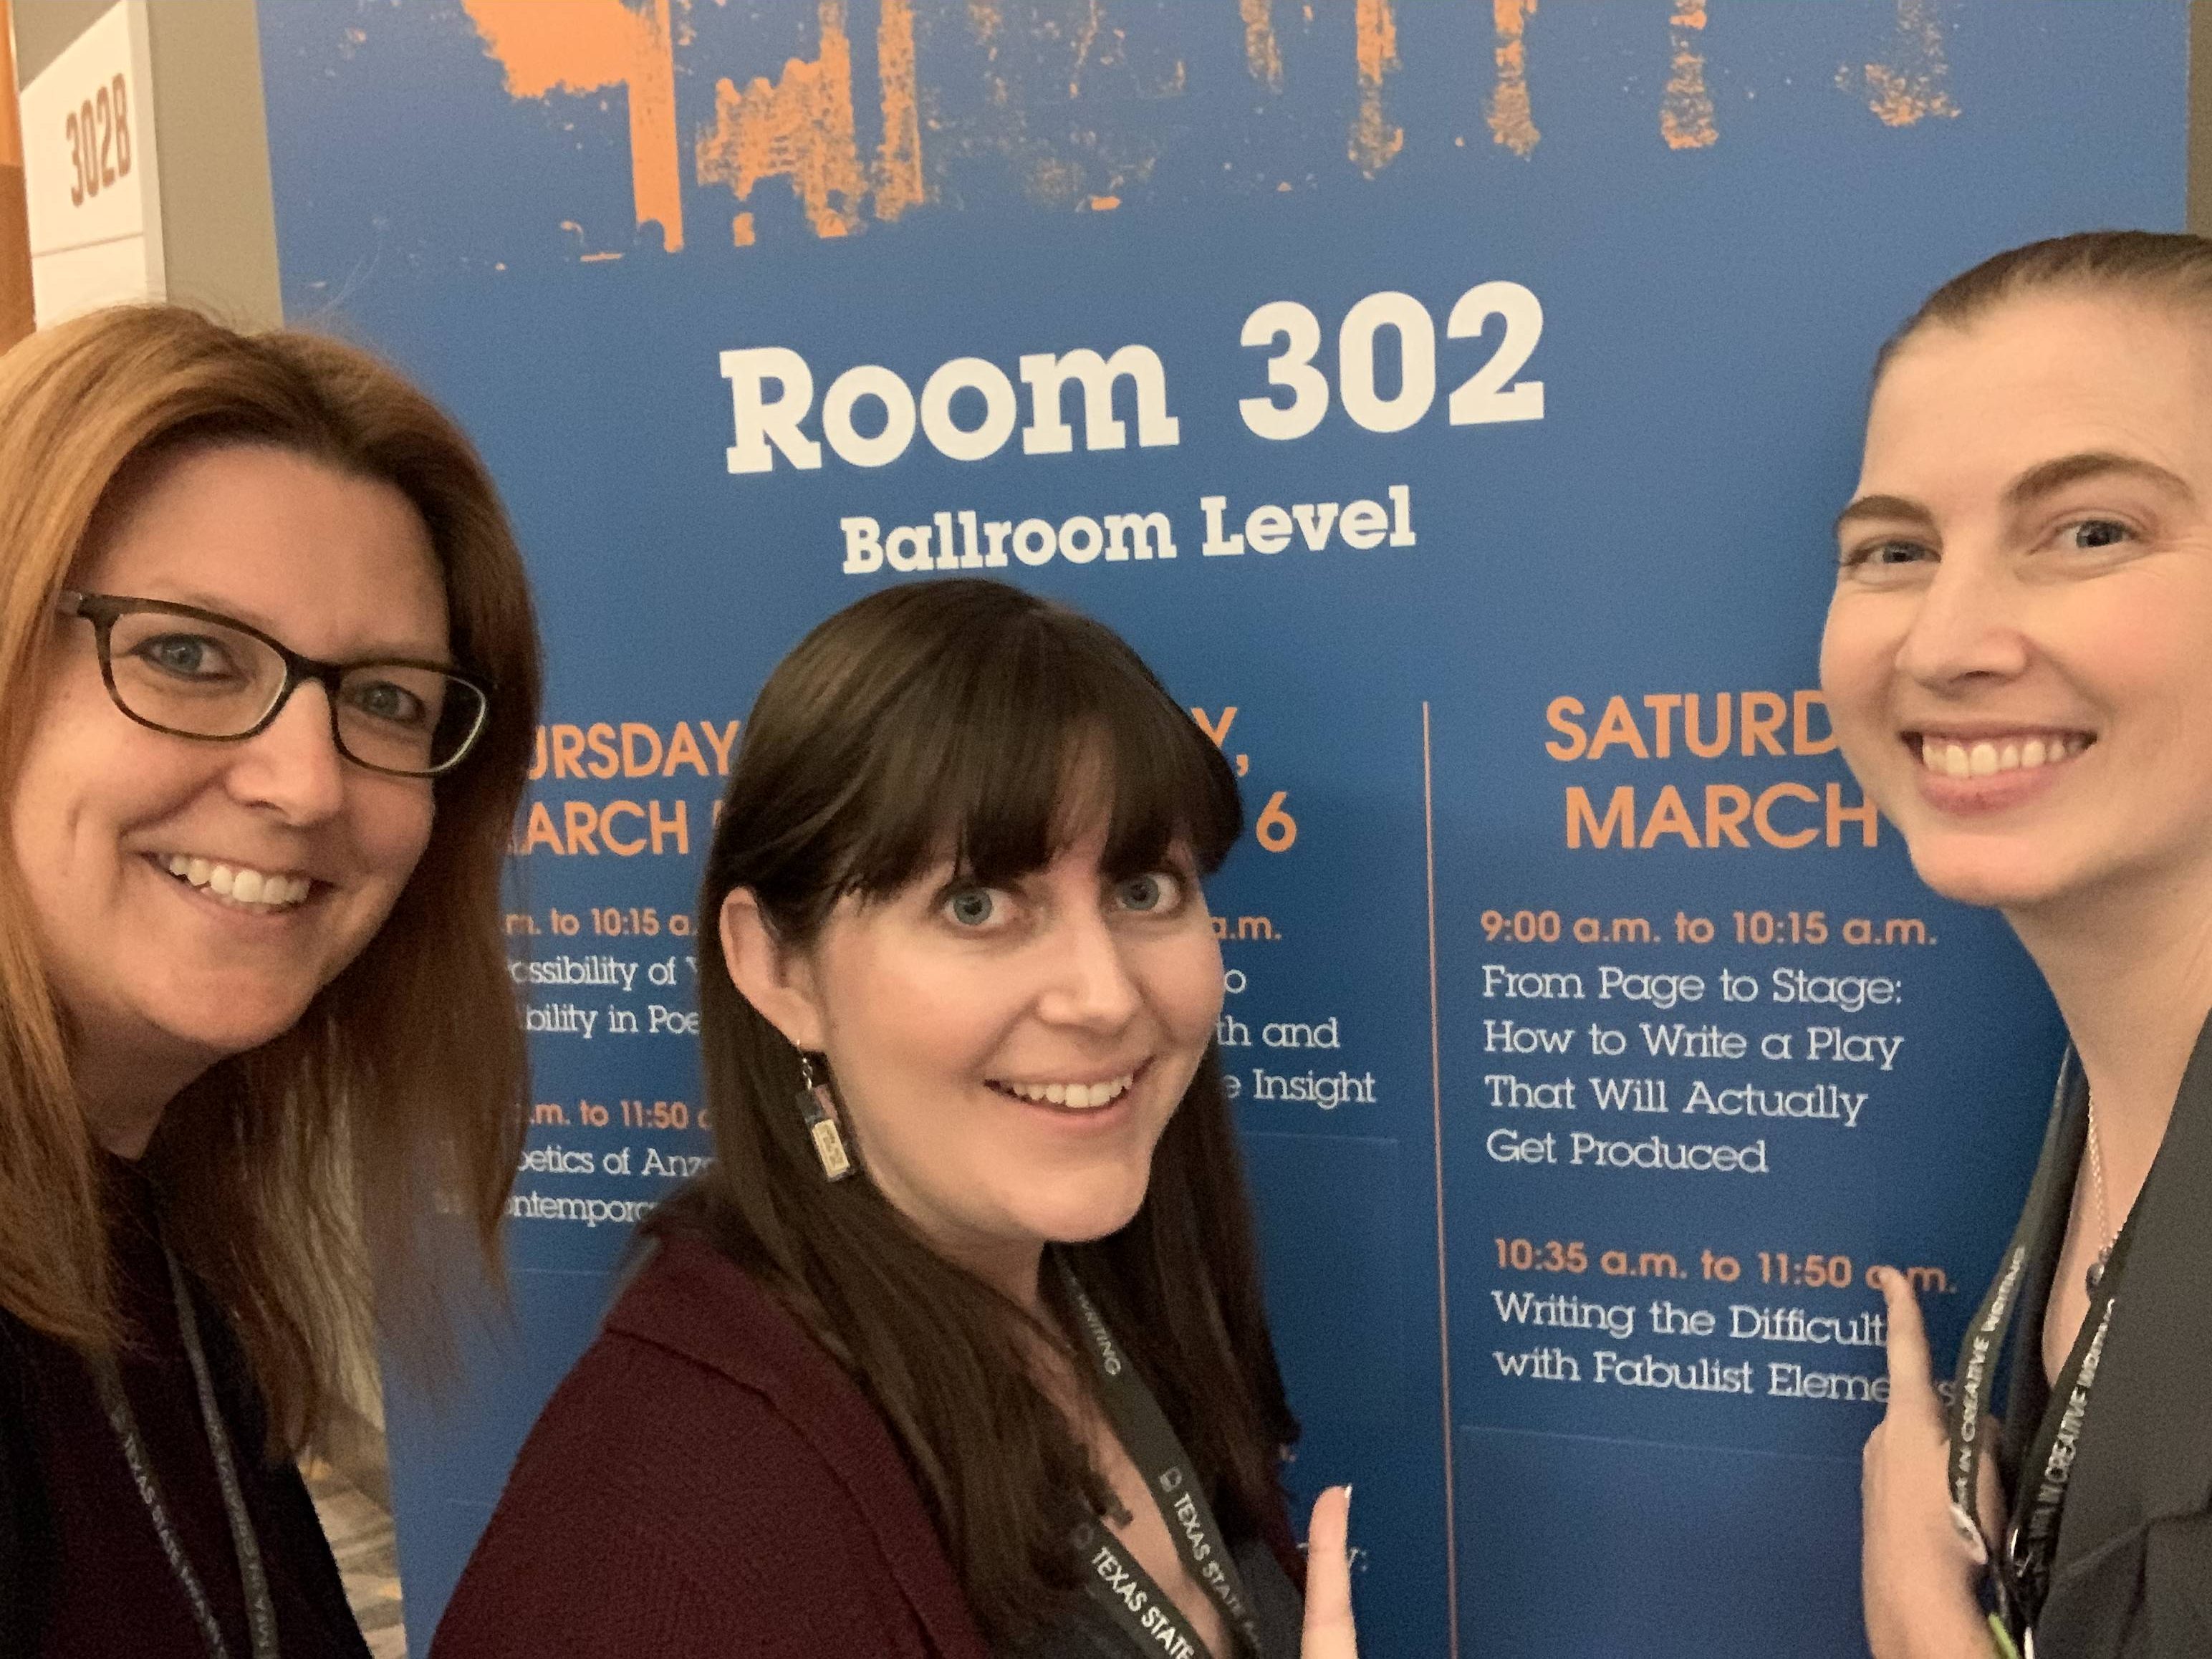 Annlee, Jessica, and Lauren outside of our panel room.